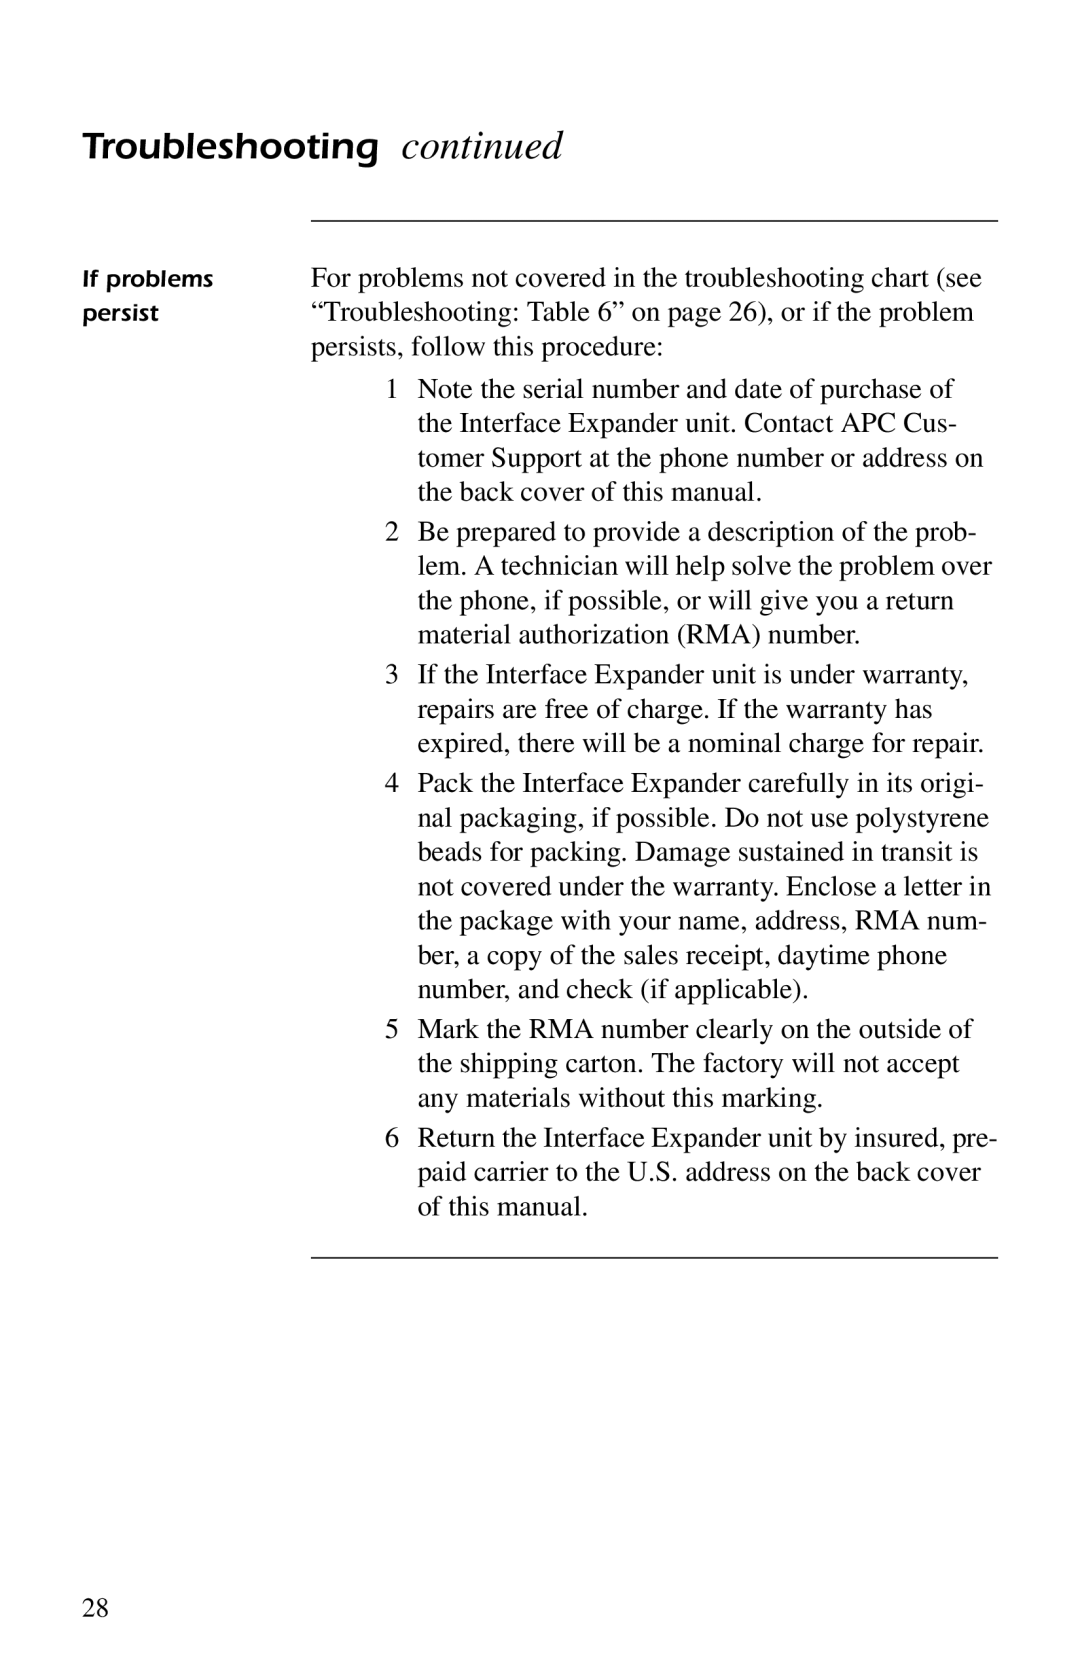 APC AP9607 manual For problems not covered in the troubleshooting chart see, Troubleshooting on page 26, or if the problem 